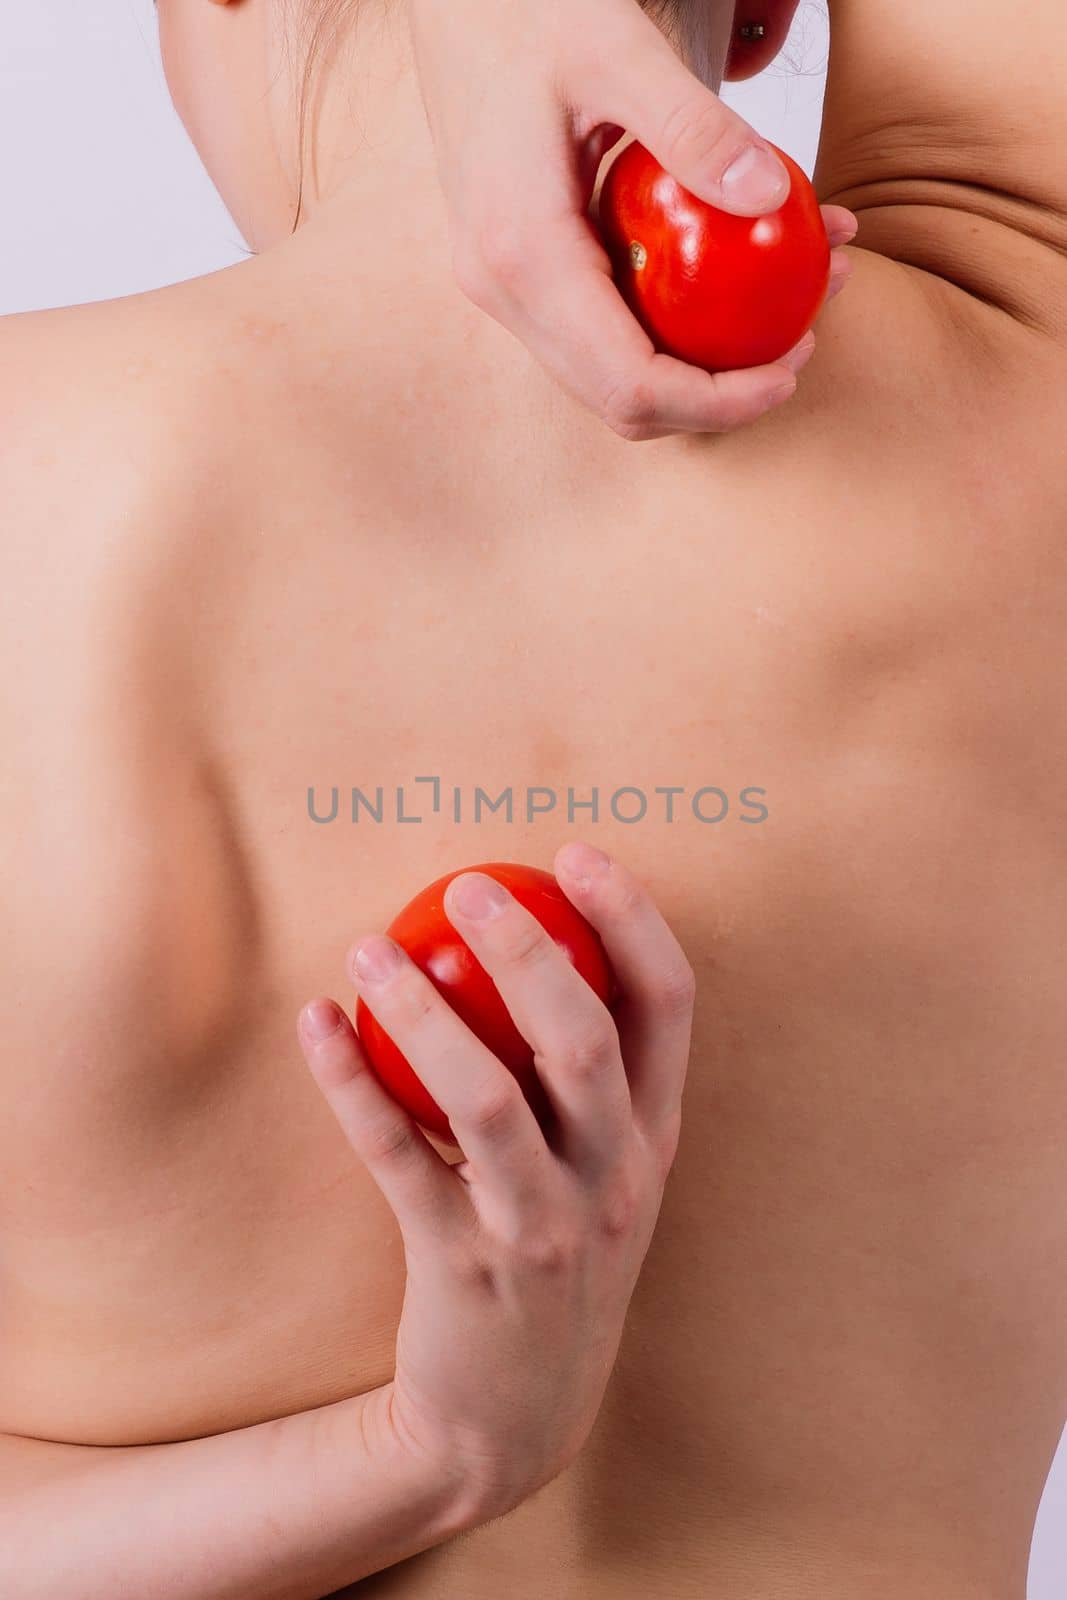 Healthy young woman holding tomatos over her eyes, laughing, bare shoulders, topless. by Zelenin